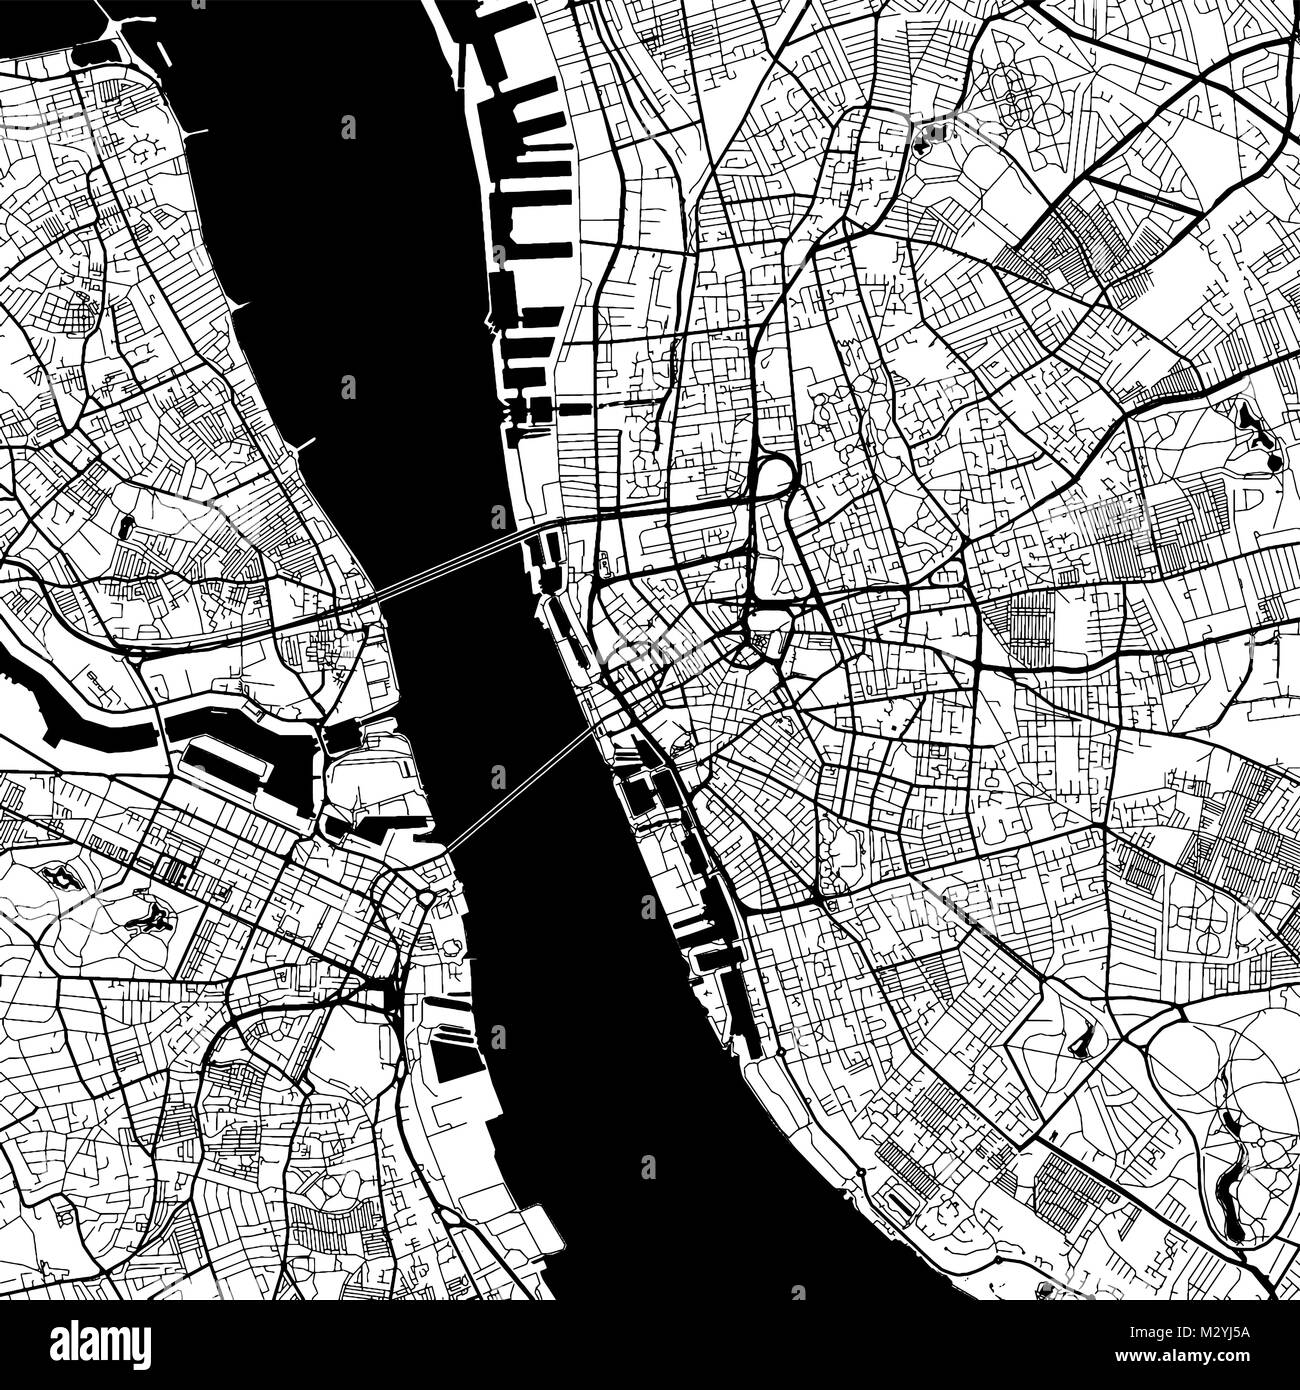 Liverpool Downtown Vector Map Monochrome Artprint, Outline Version for Infographic Background, Black Streets and Waterways Stock Vector